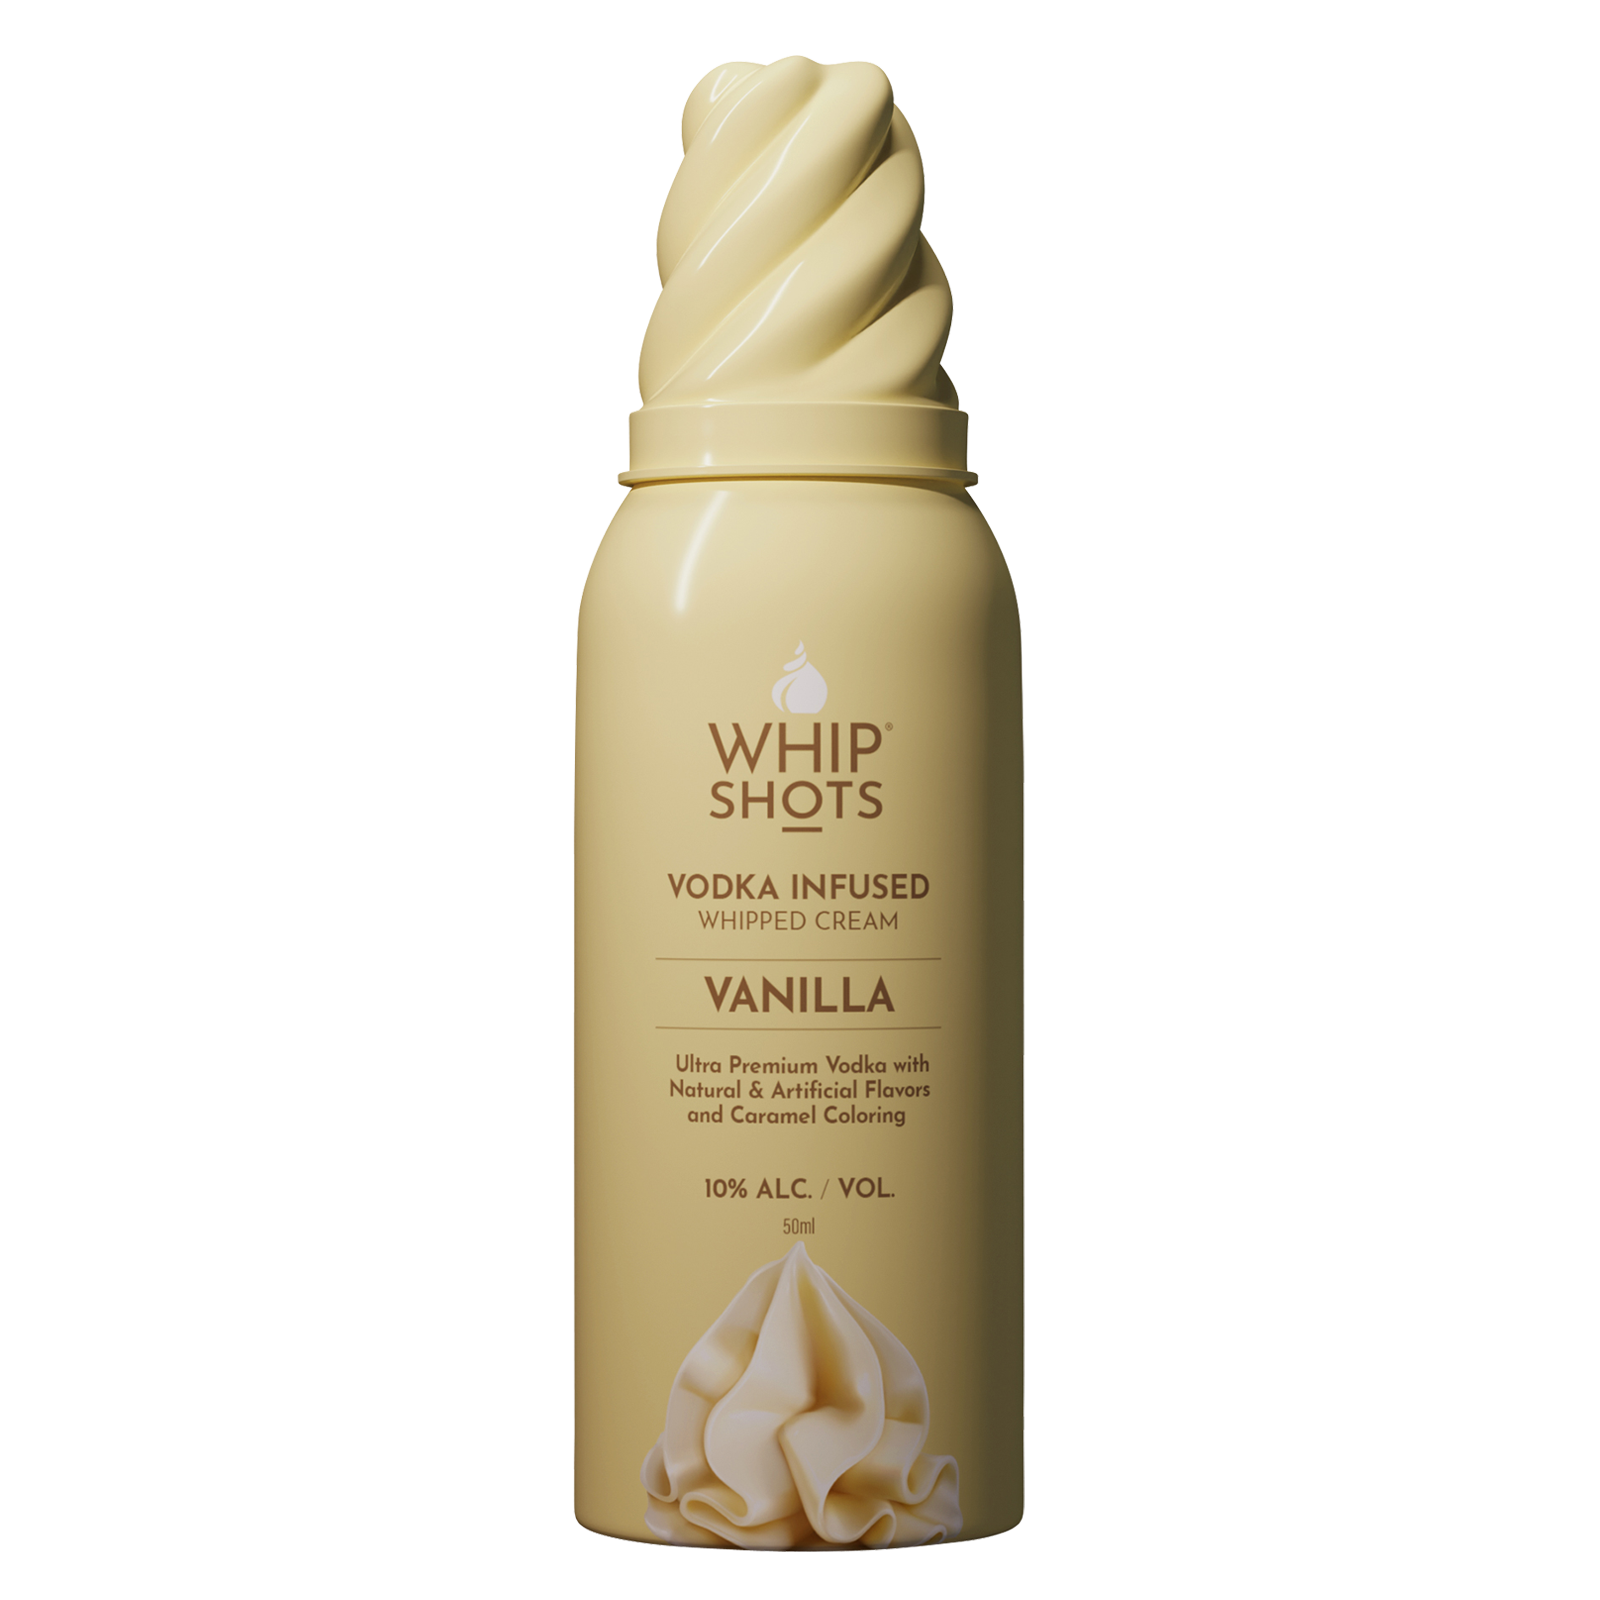 Whipshots Vanilla Vodka Infused Whipped Cream 50ml 10% ABV